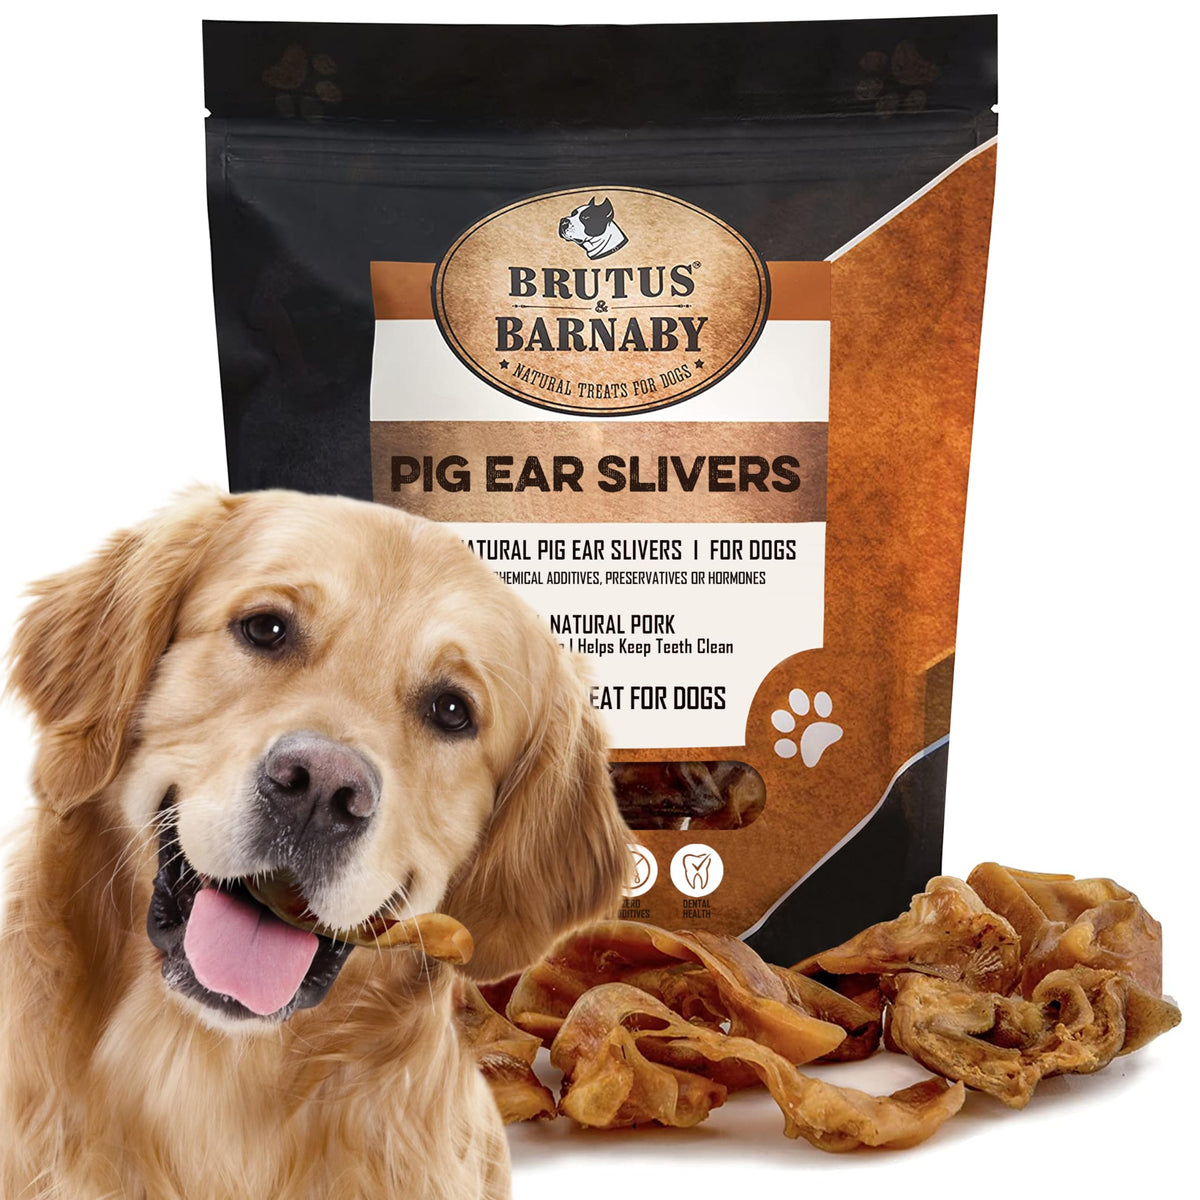 BRUTUS & BARNABY Pig Ear Slivers - Thick Cut, All Natural Dog Treat, Healthy Pure Pork Ear, Easily Digested, Best Gift for Large & Small Dogs (1 lb)